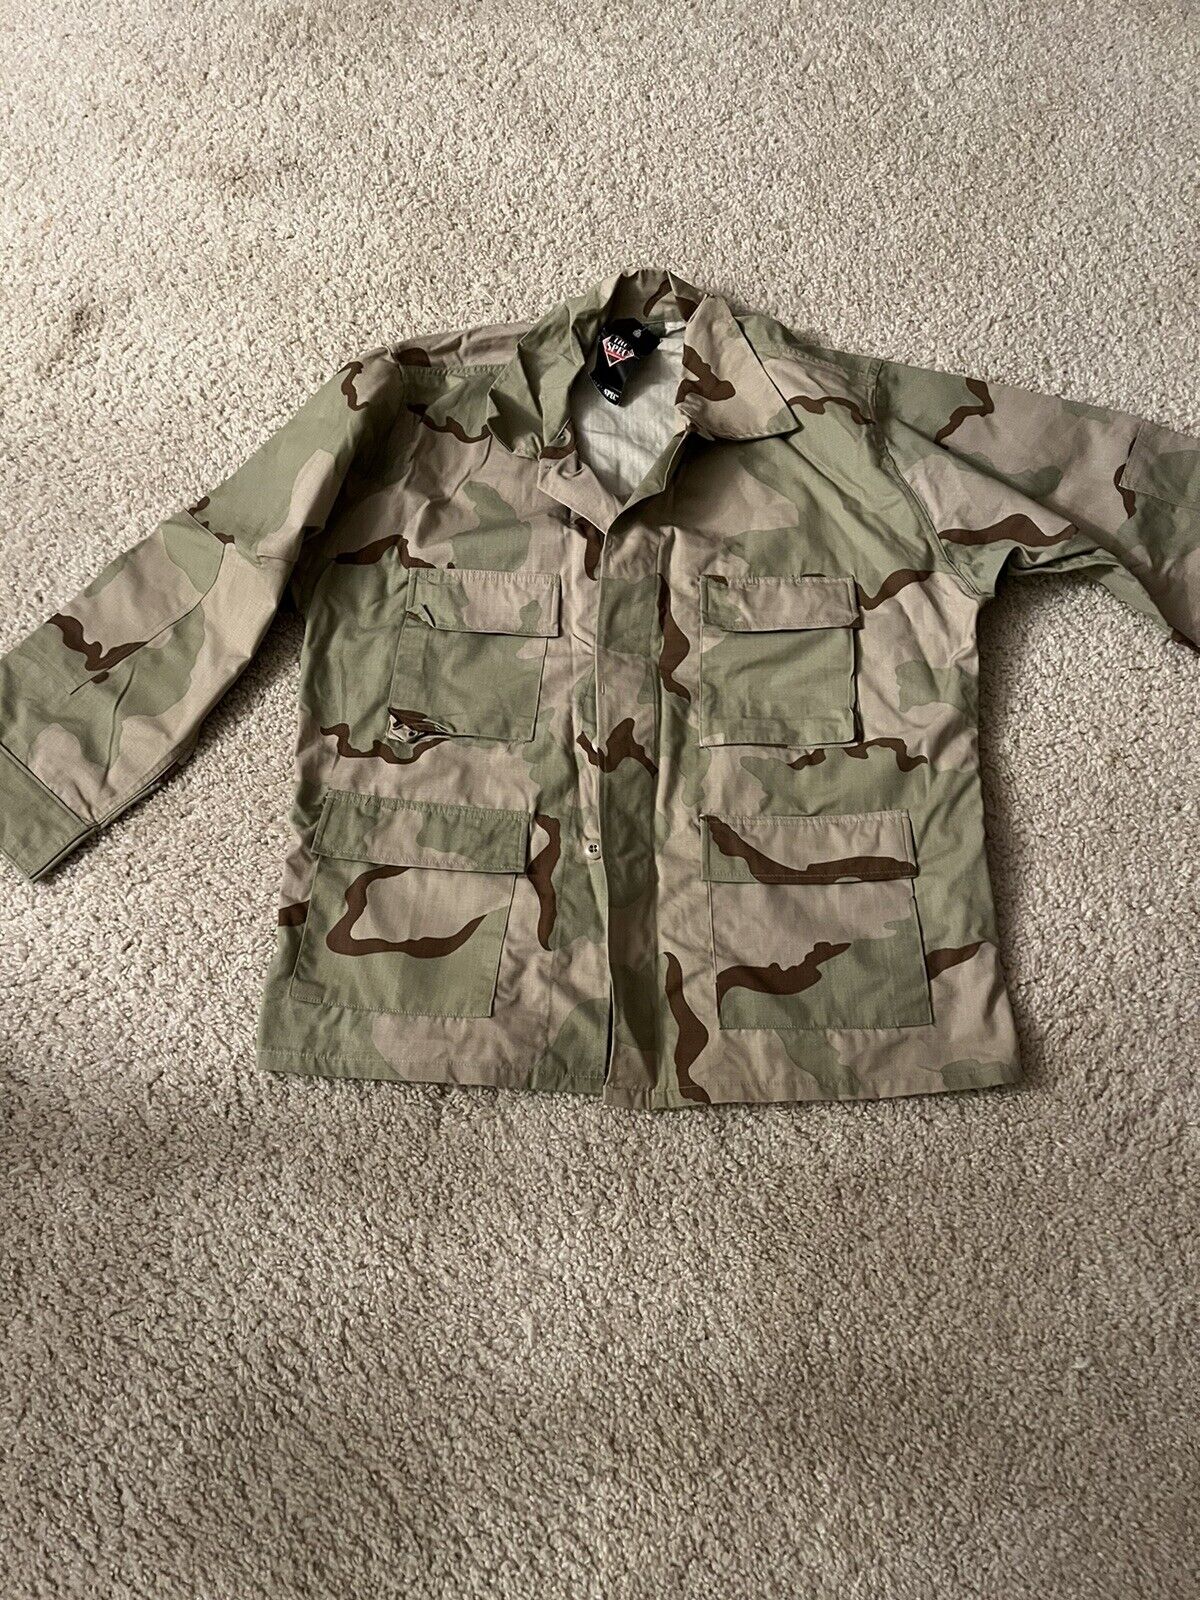 US Army/ USAF/ US Navy Desert BDU Shirt X-Large Regular; New With Tags